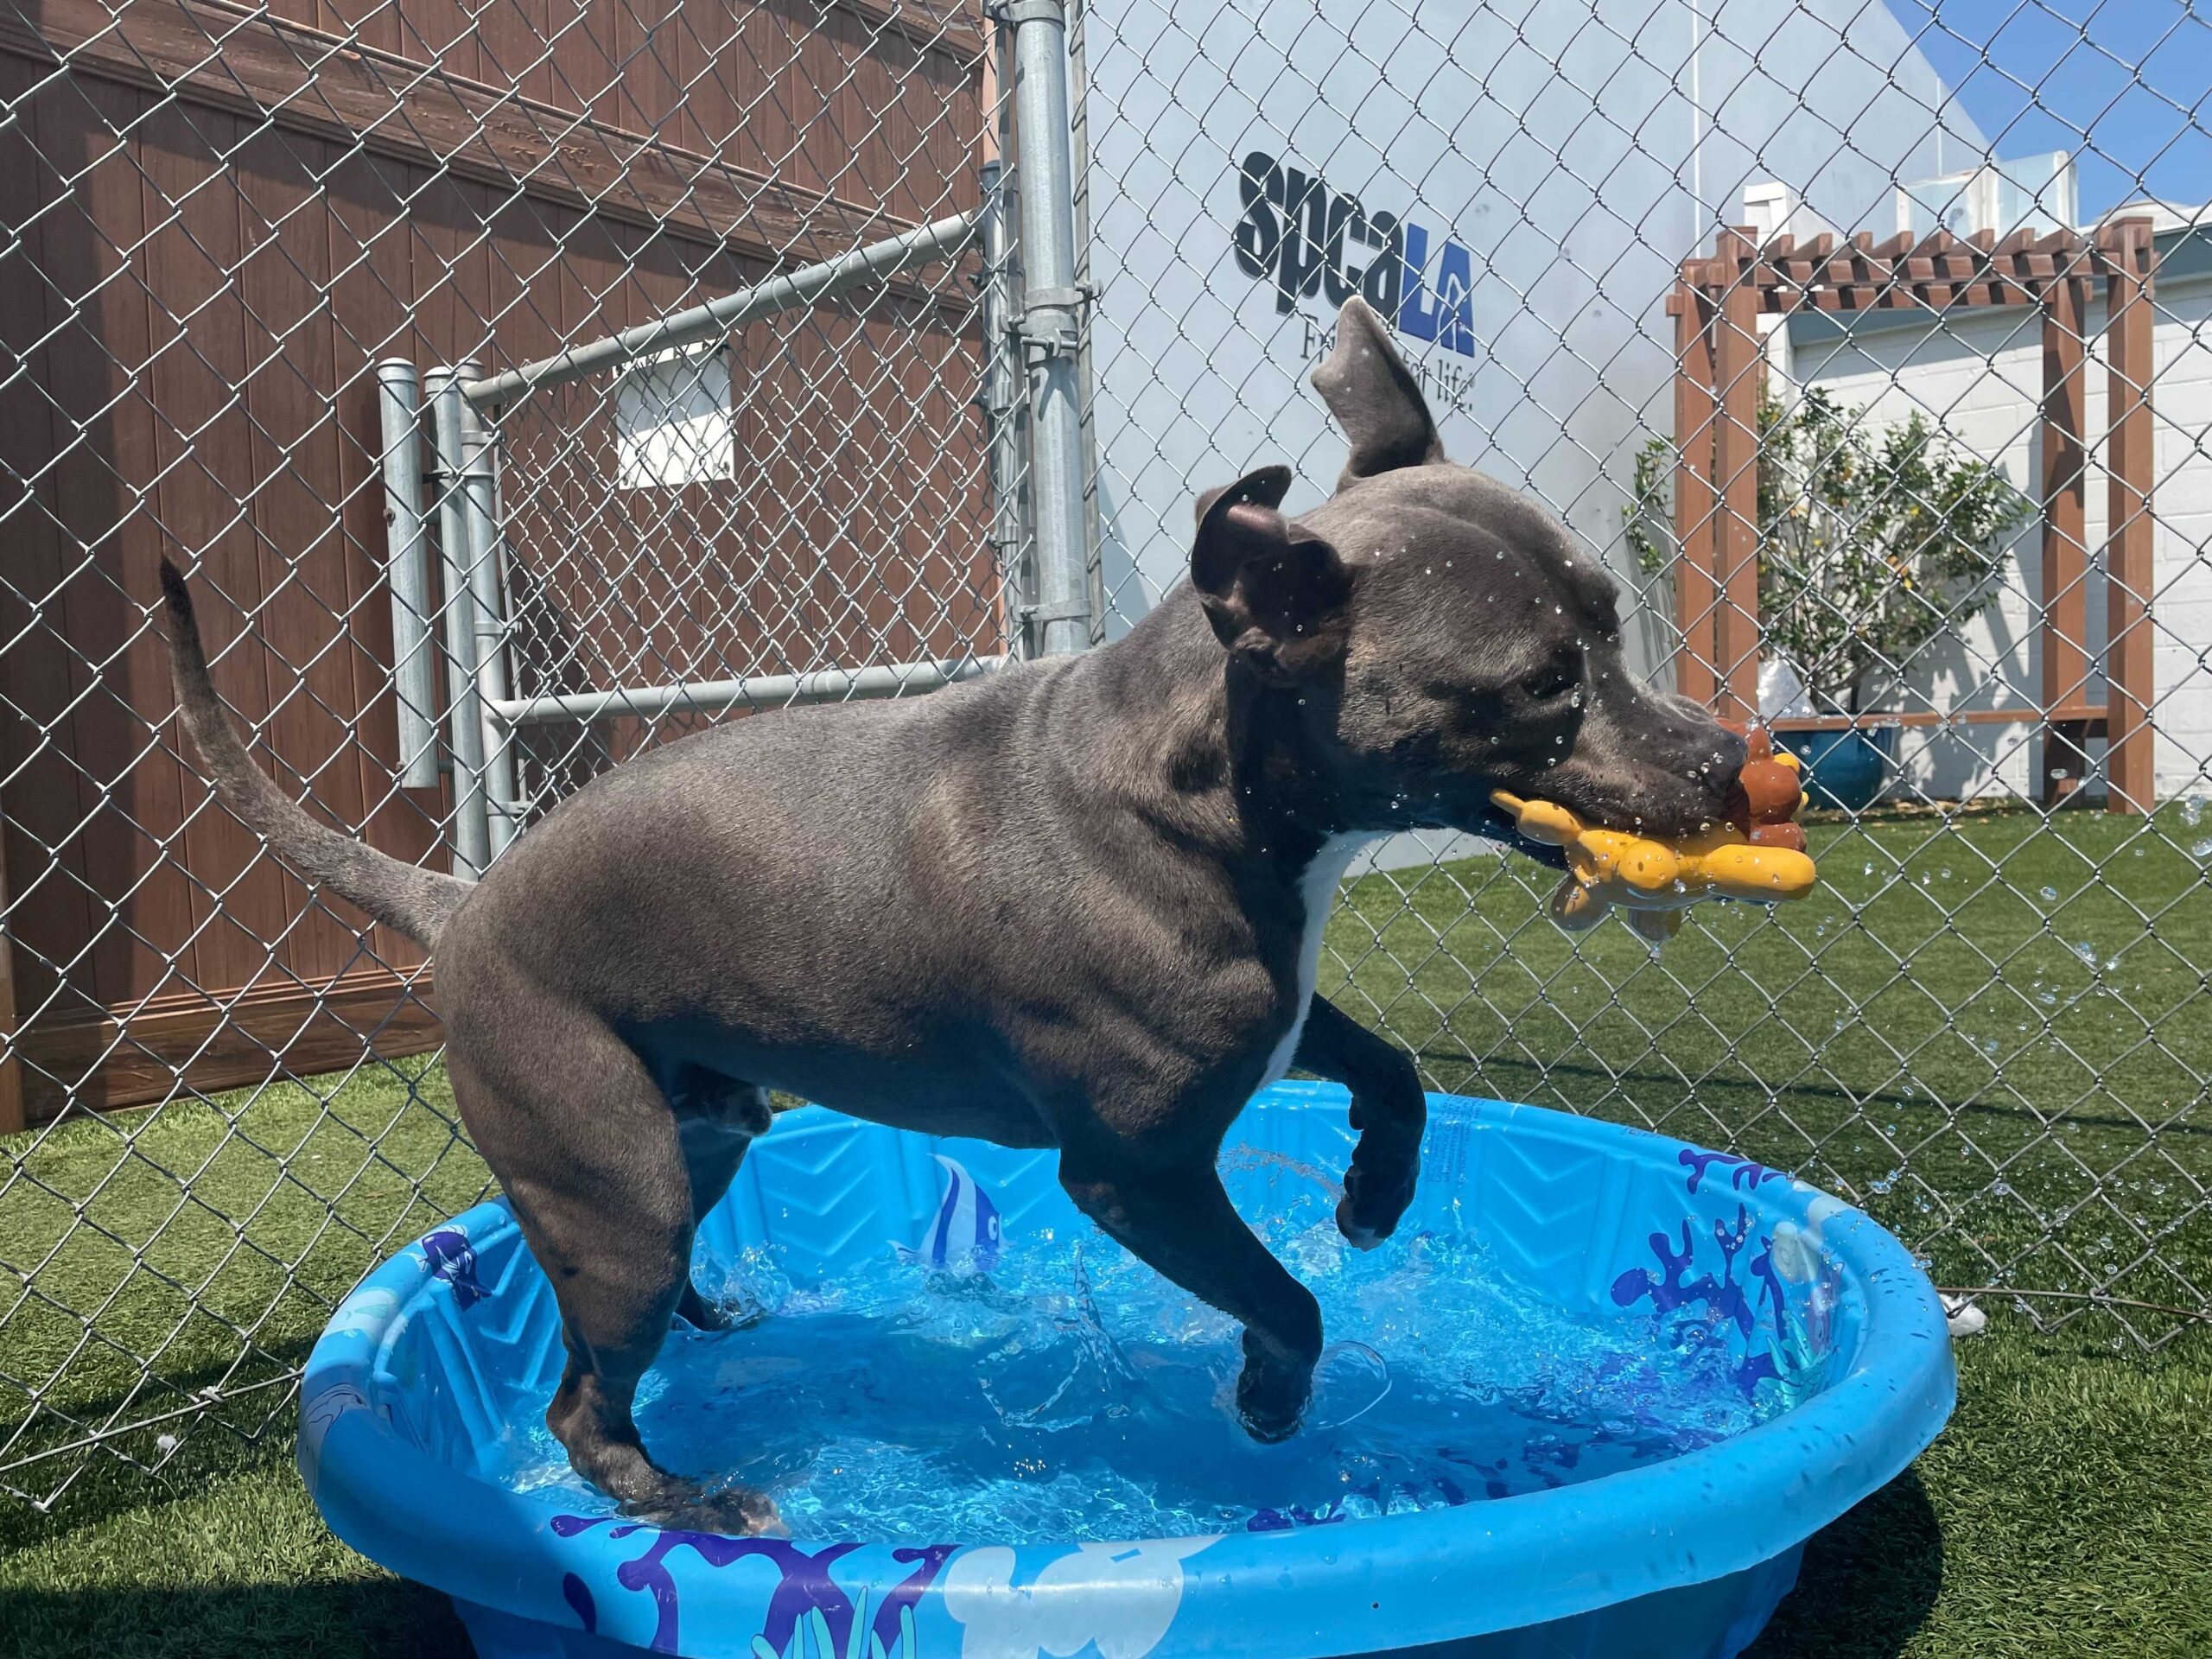 Grey Pitbull dog playing with yellow toy in blue kiddie pool